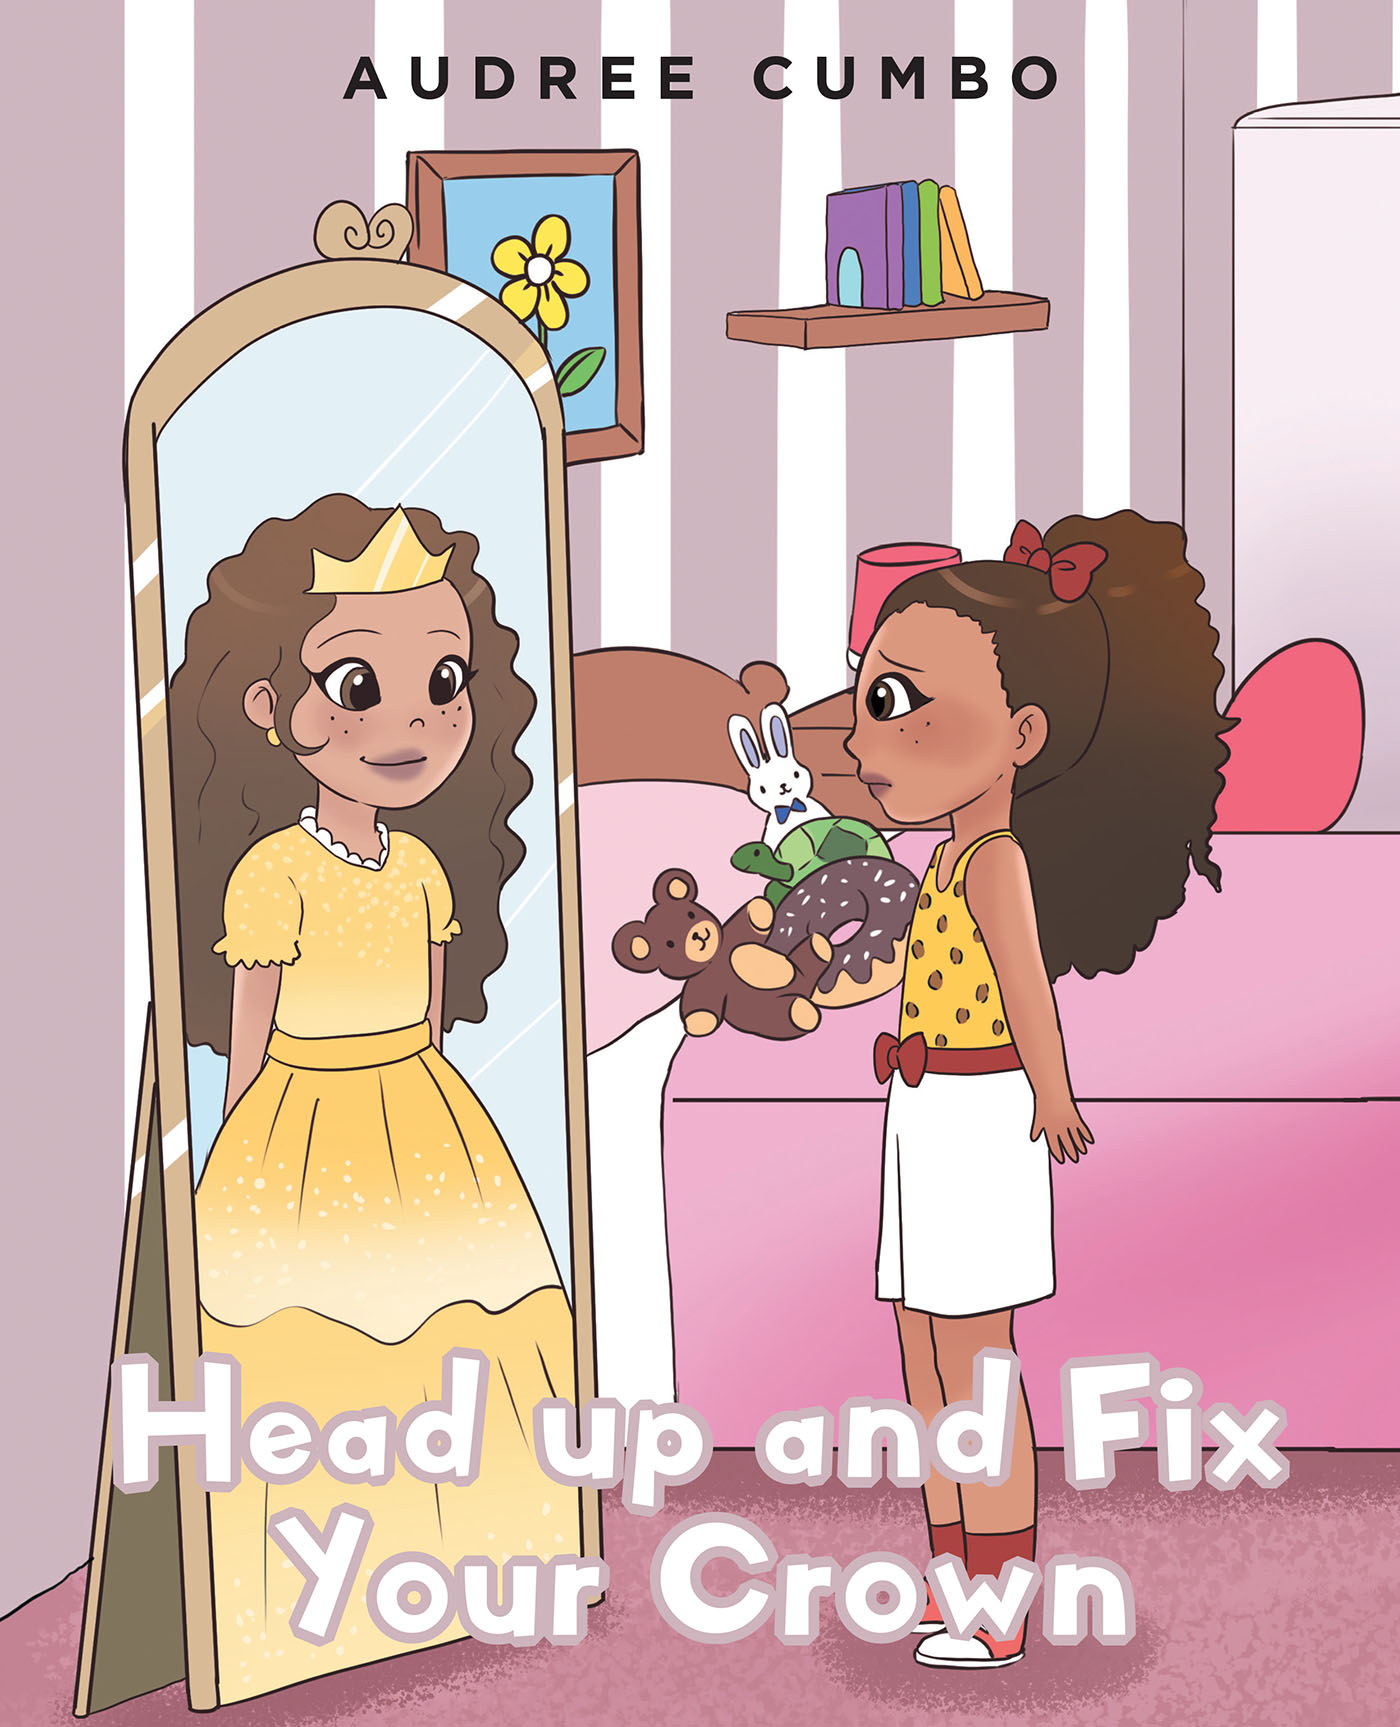 Audree Cumbo’s New Book, "Head Up and Fix Your Crown," Follows a Young Girl Named Chloe, Who Recounts Her Bad Day to Her Mother and Receives Important Words of Wisdom